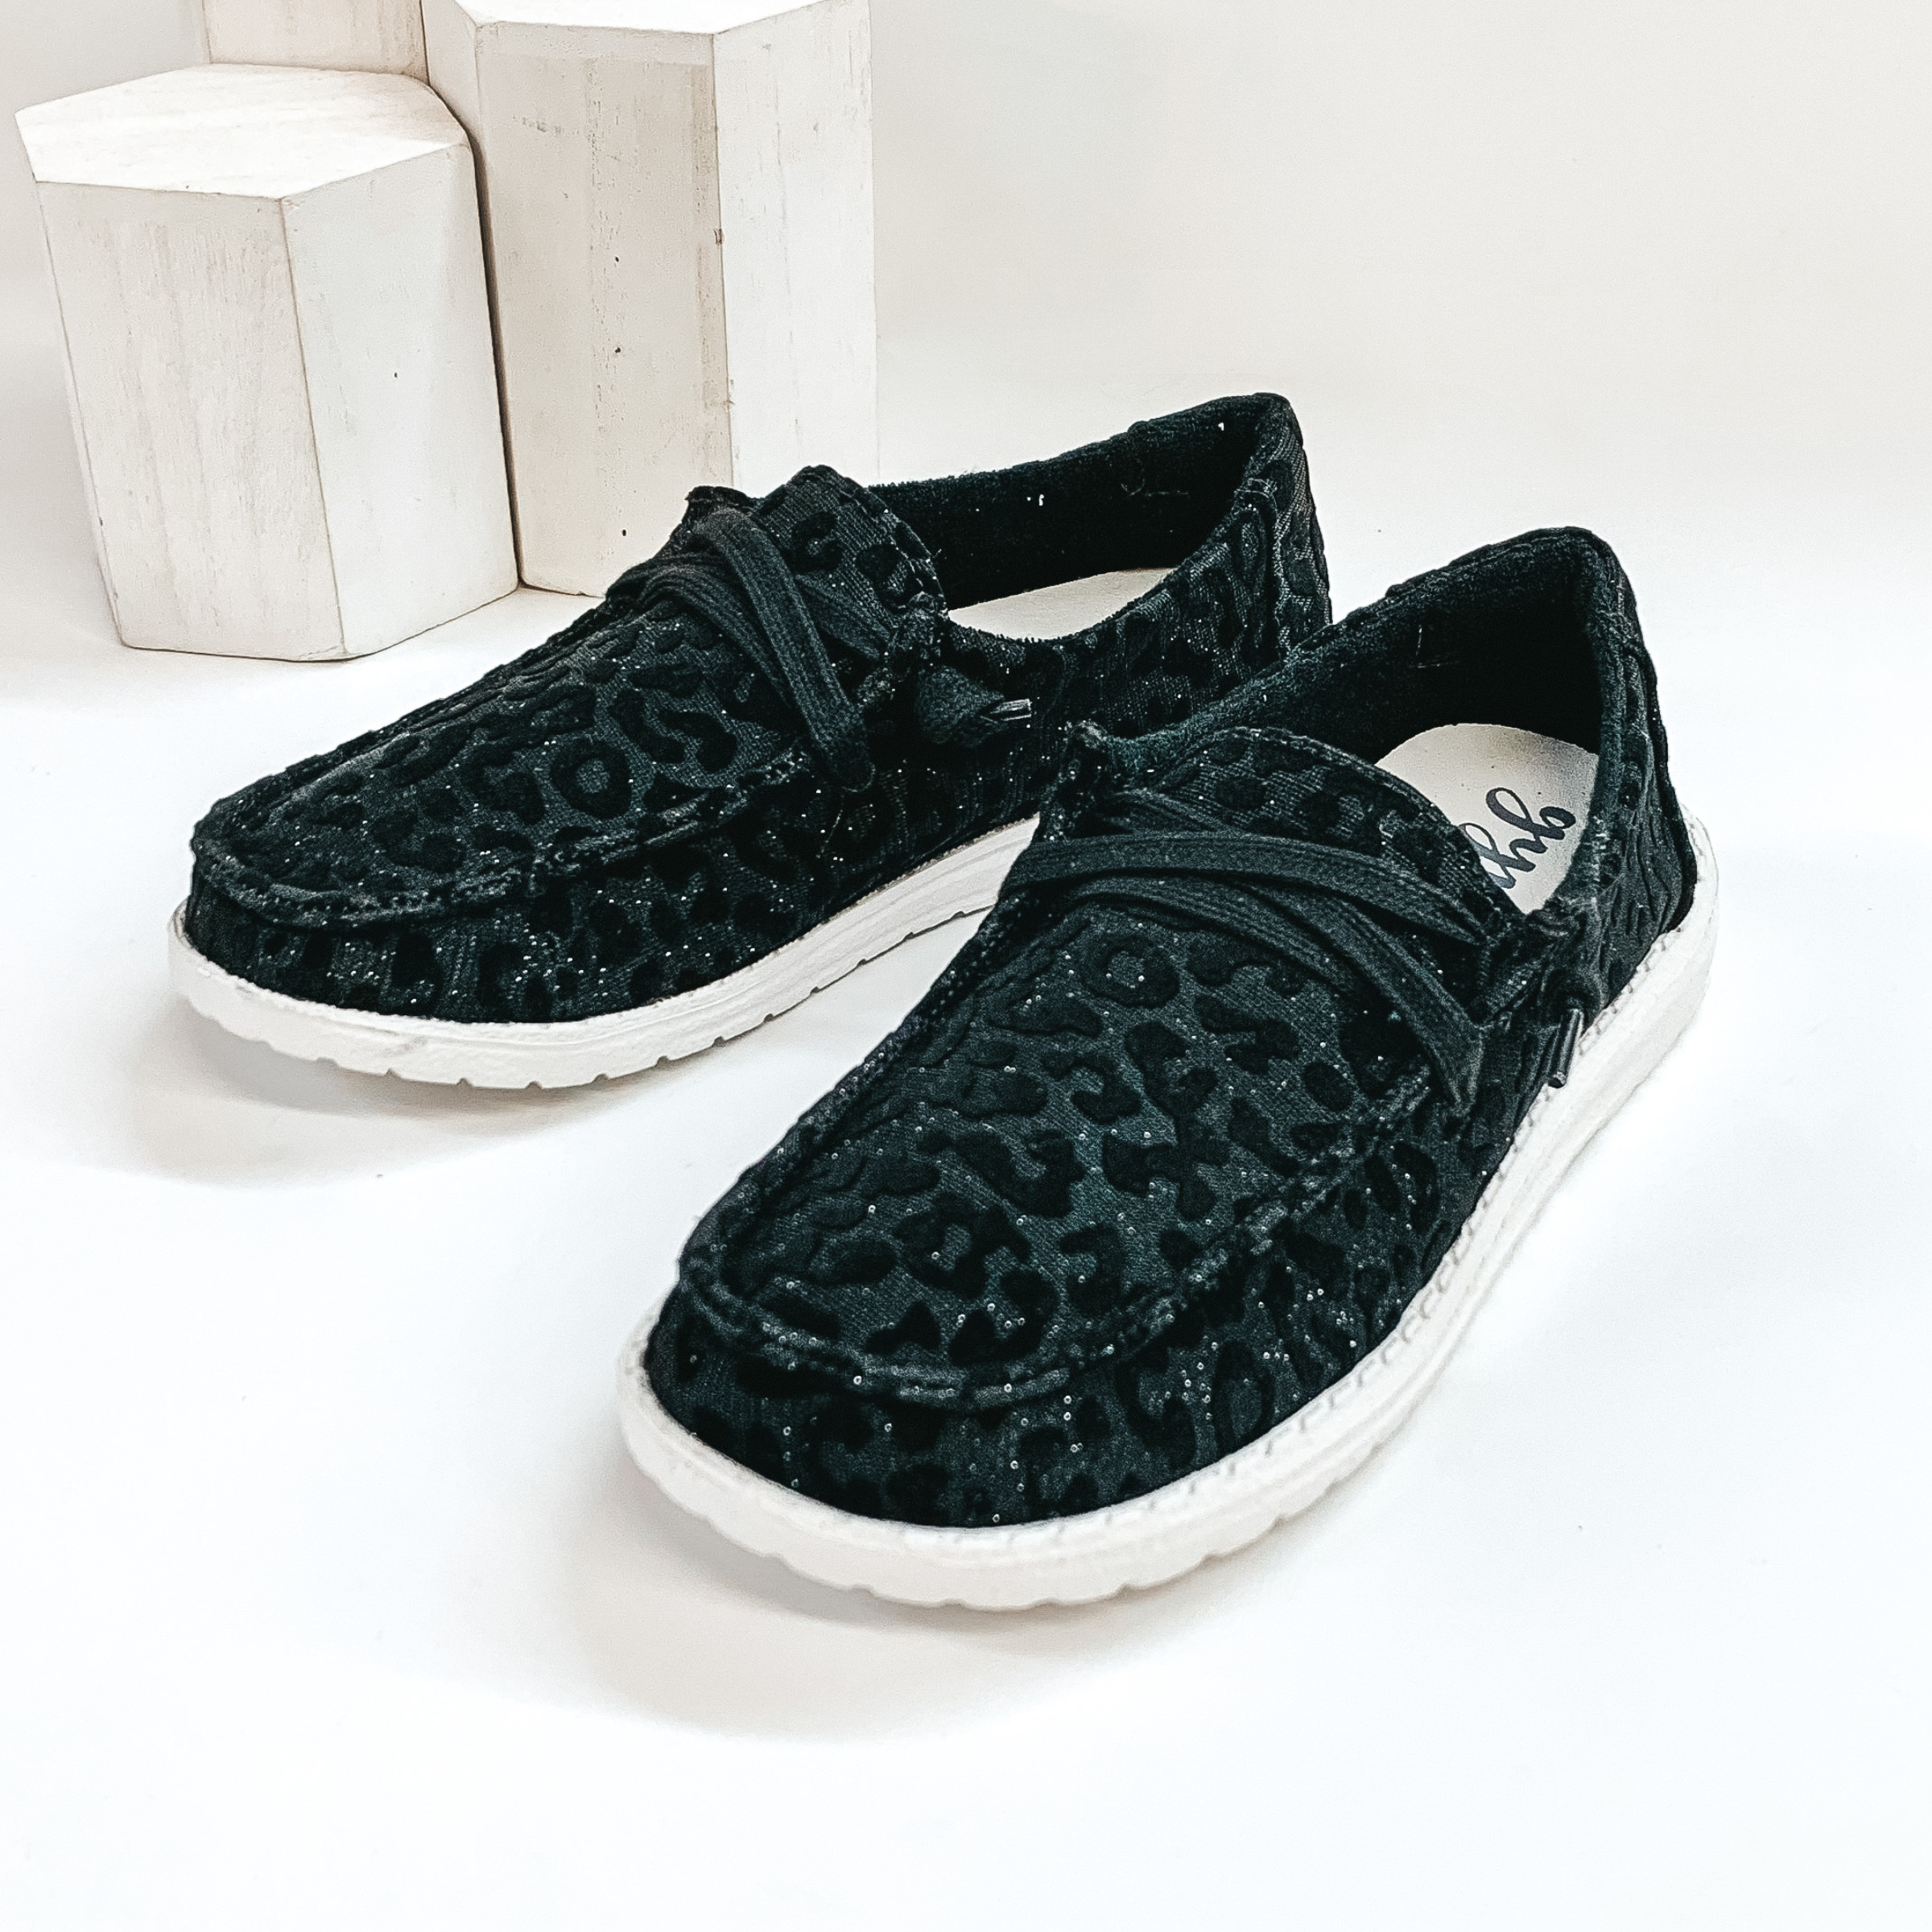 A pair of glitter black leopard print lace up loafers pictured on white background with white blacks behind them. .